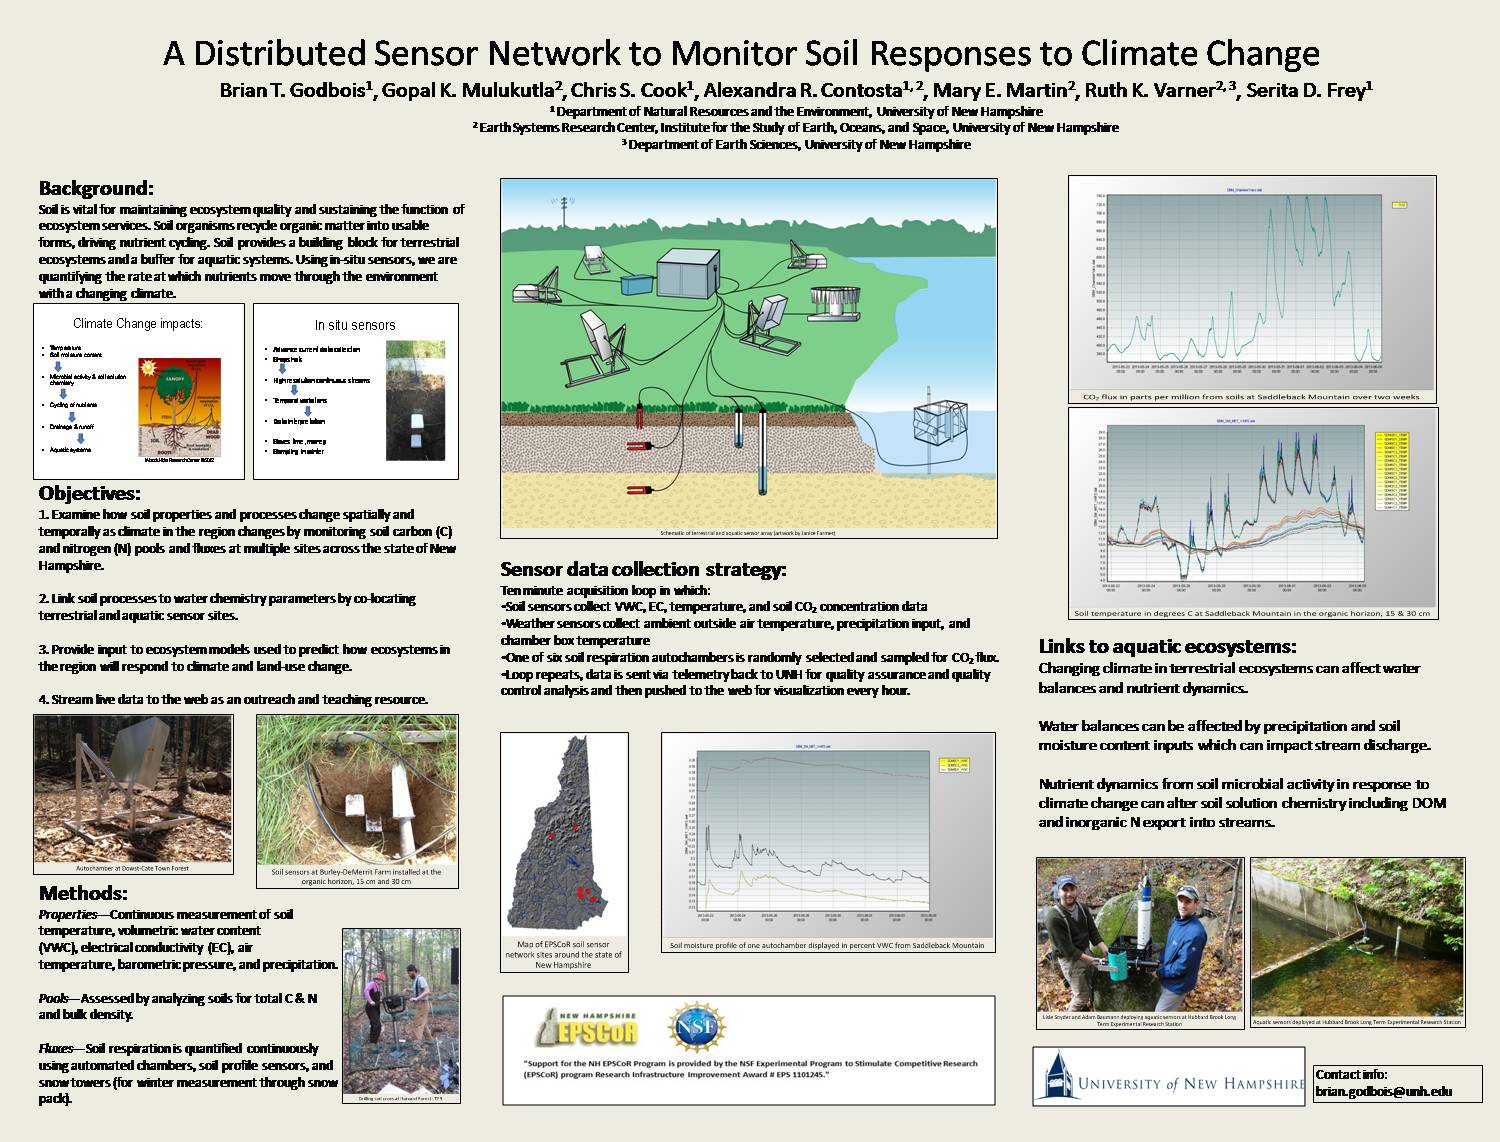 A Distributed Sensor Network To Monitor Soil Responses To Climate Change by btv4